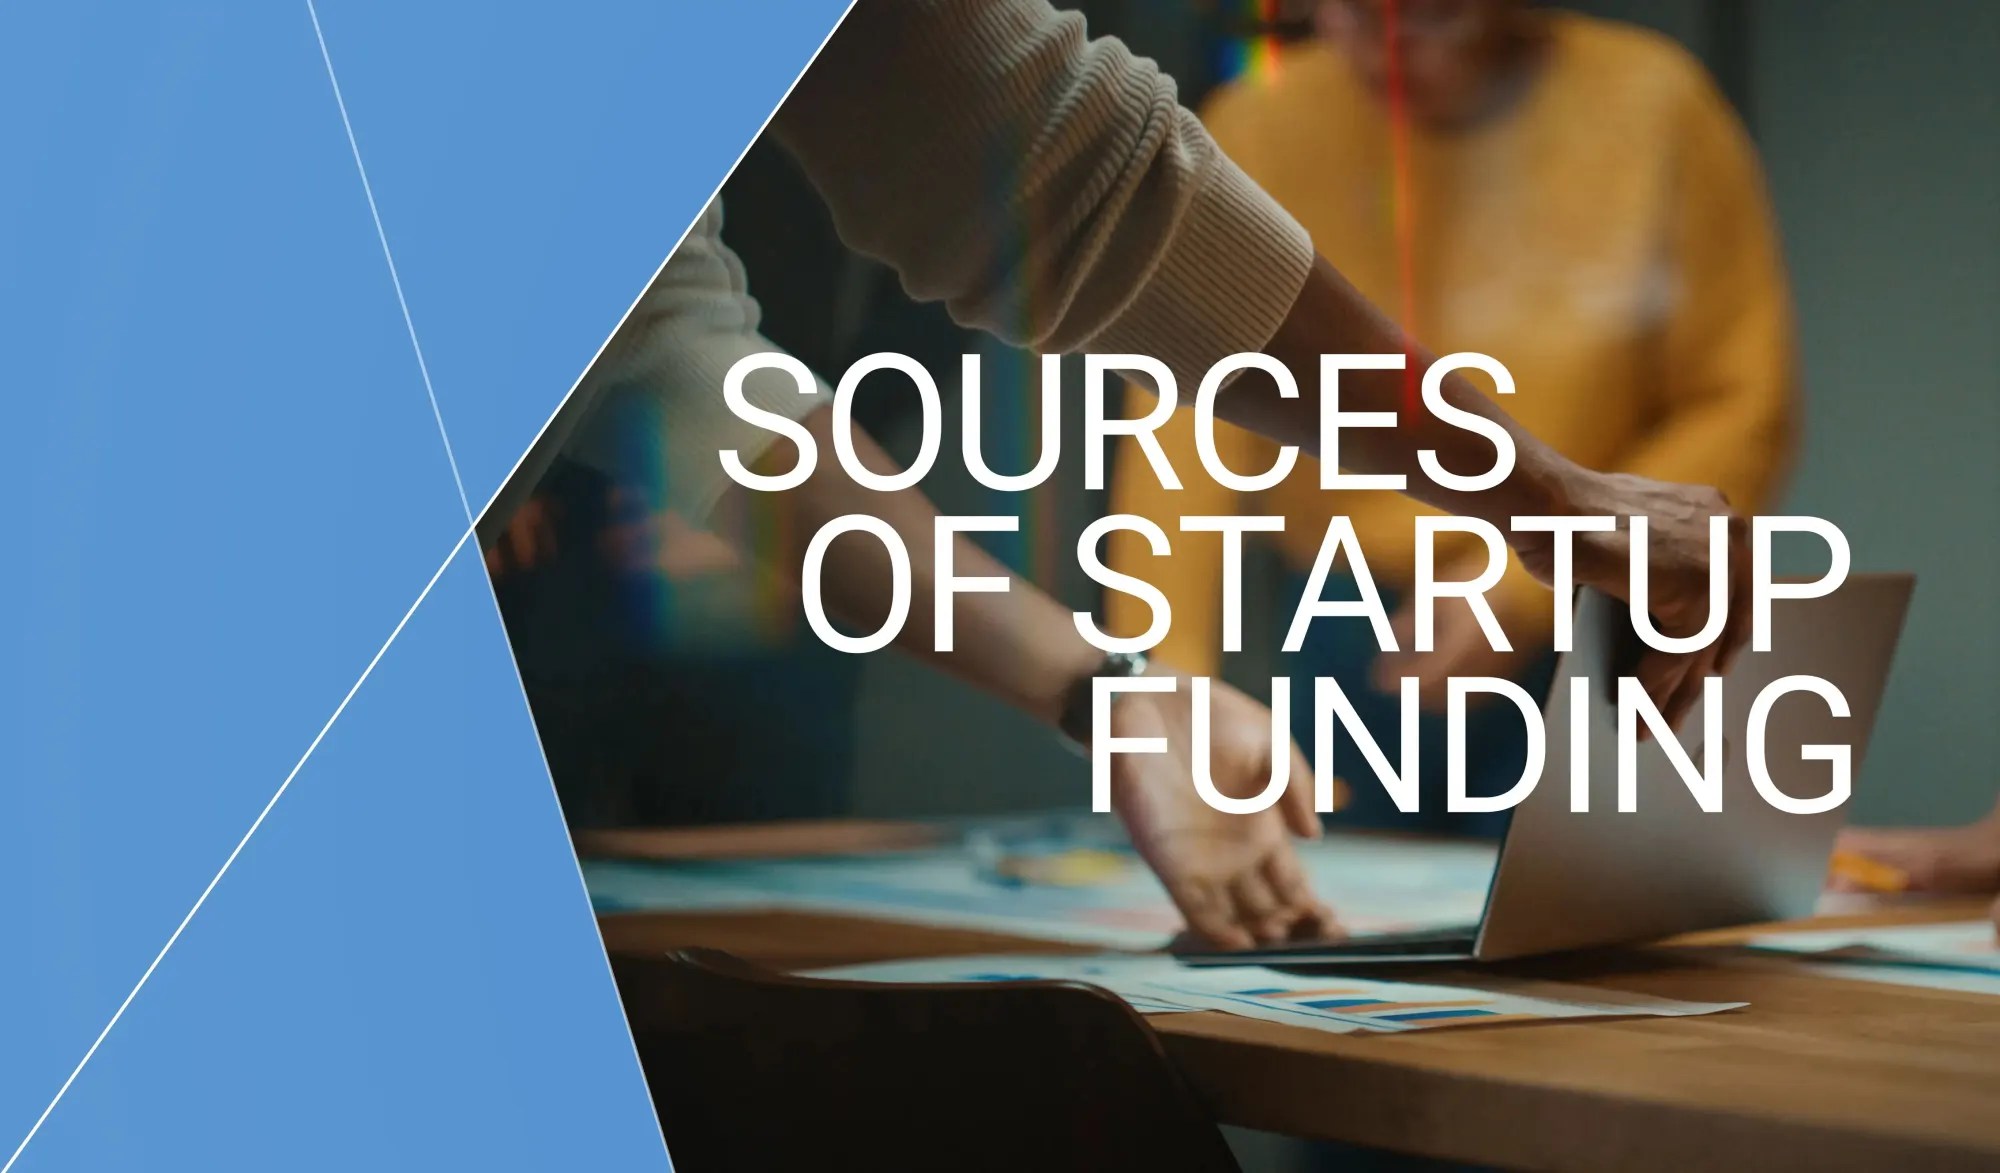 Sources of Startup Funding Explained